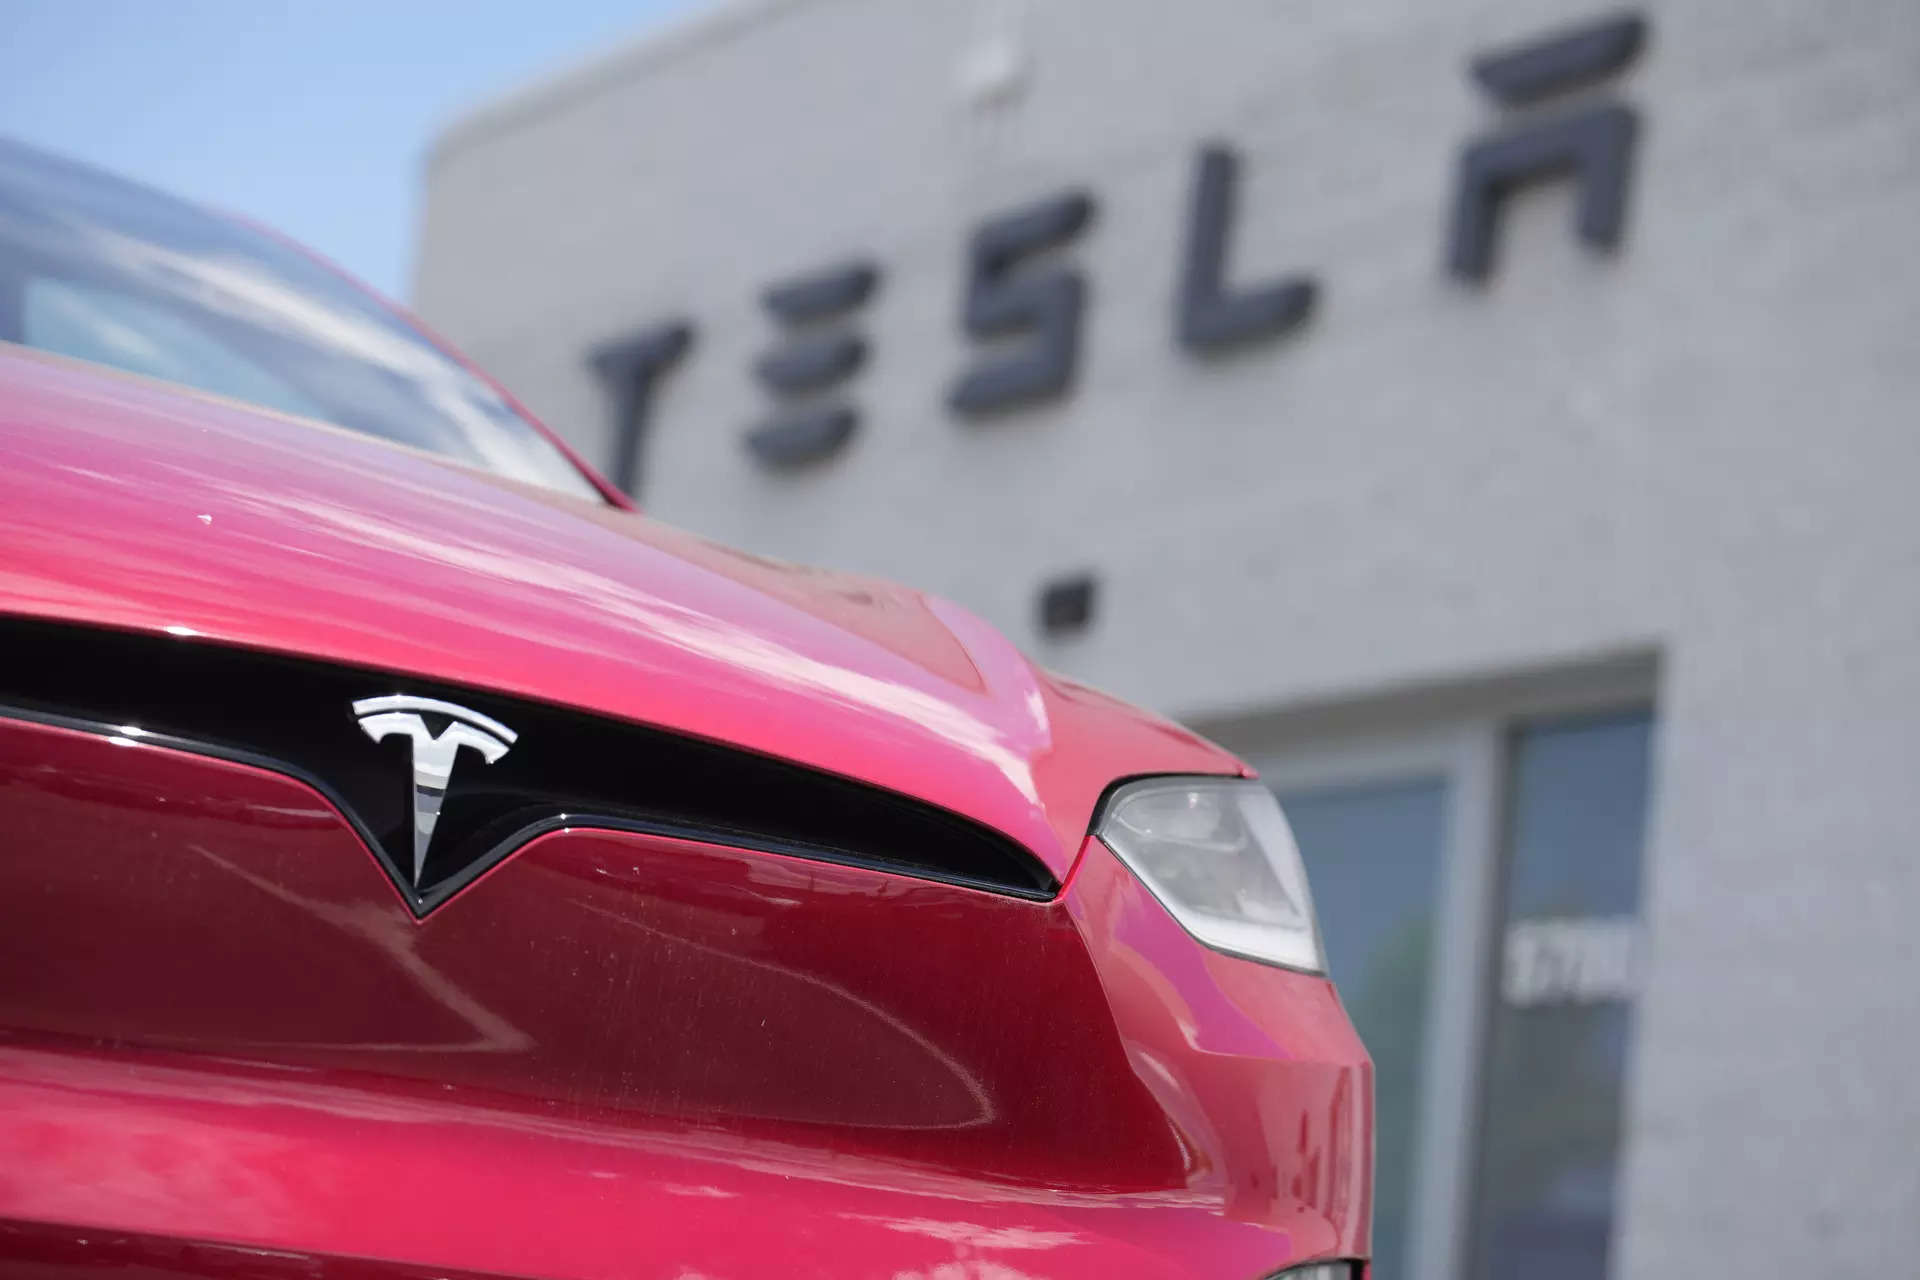 Tesla's new Model S and Model X just became a lot more competitive